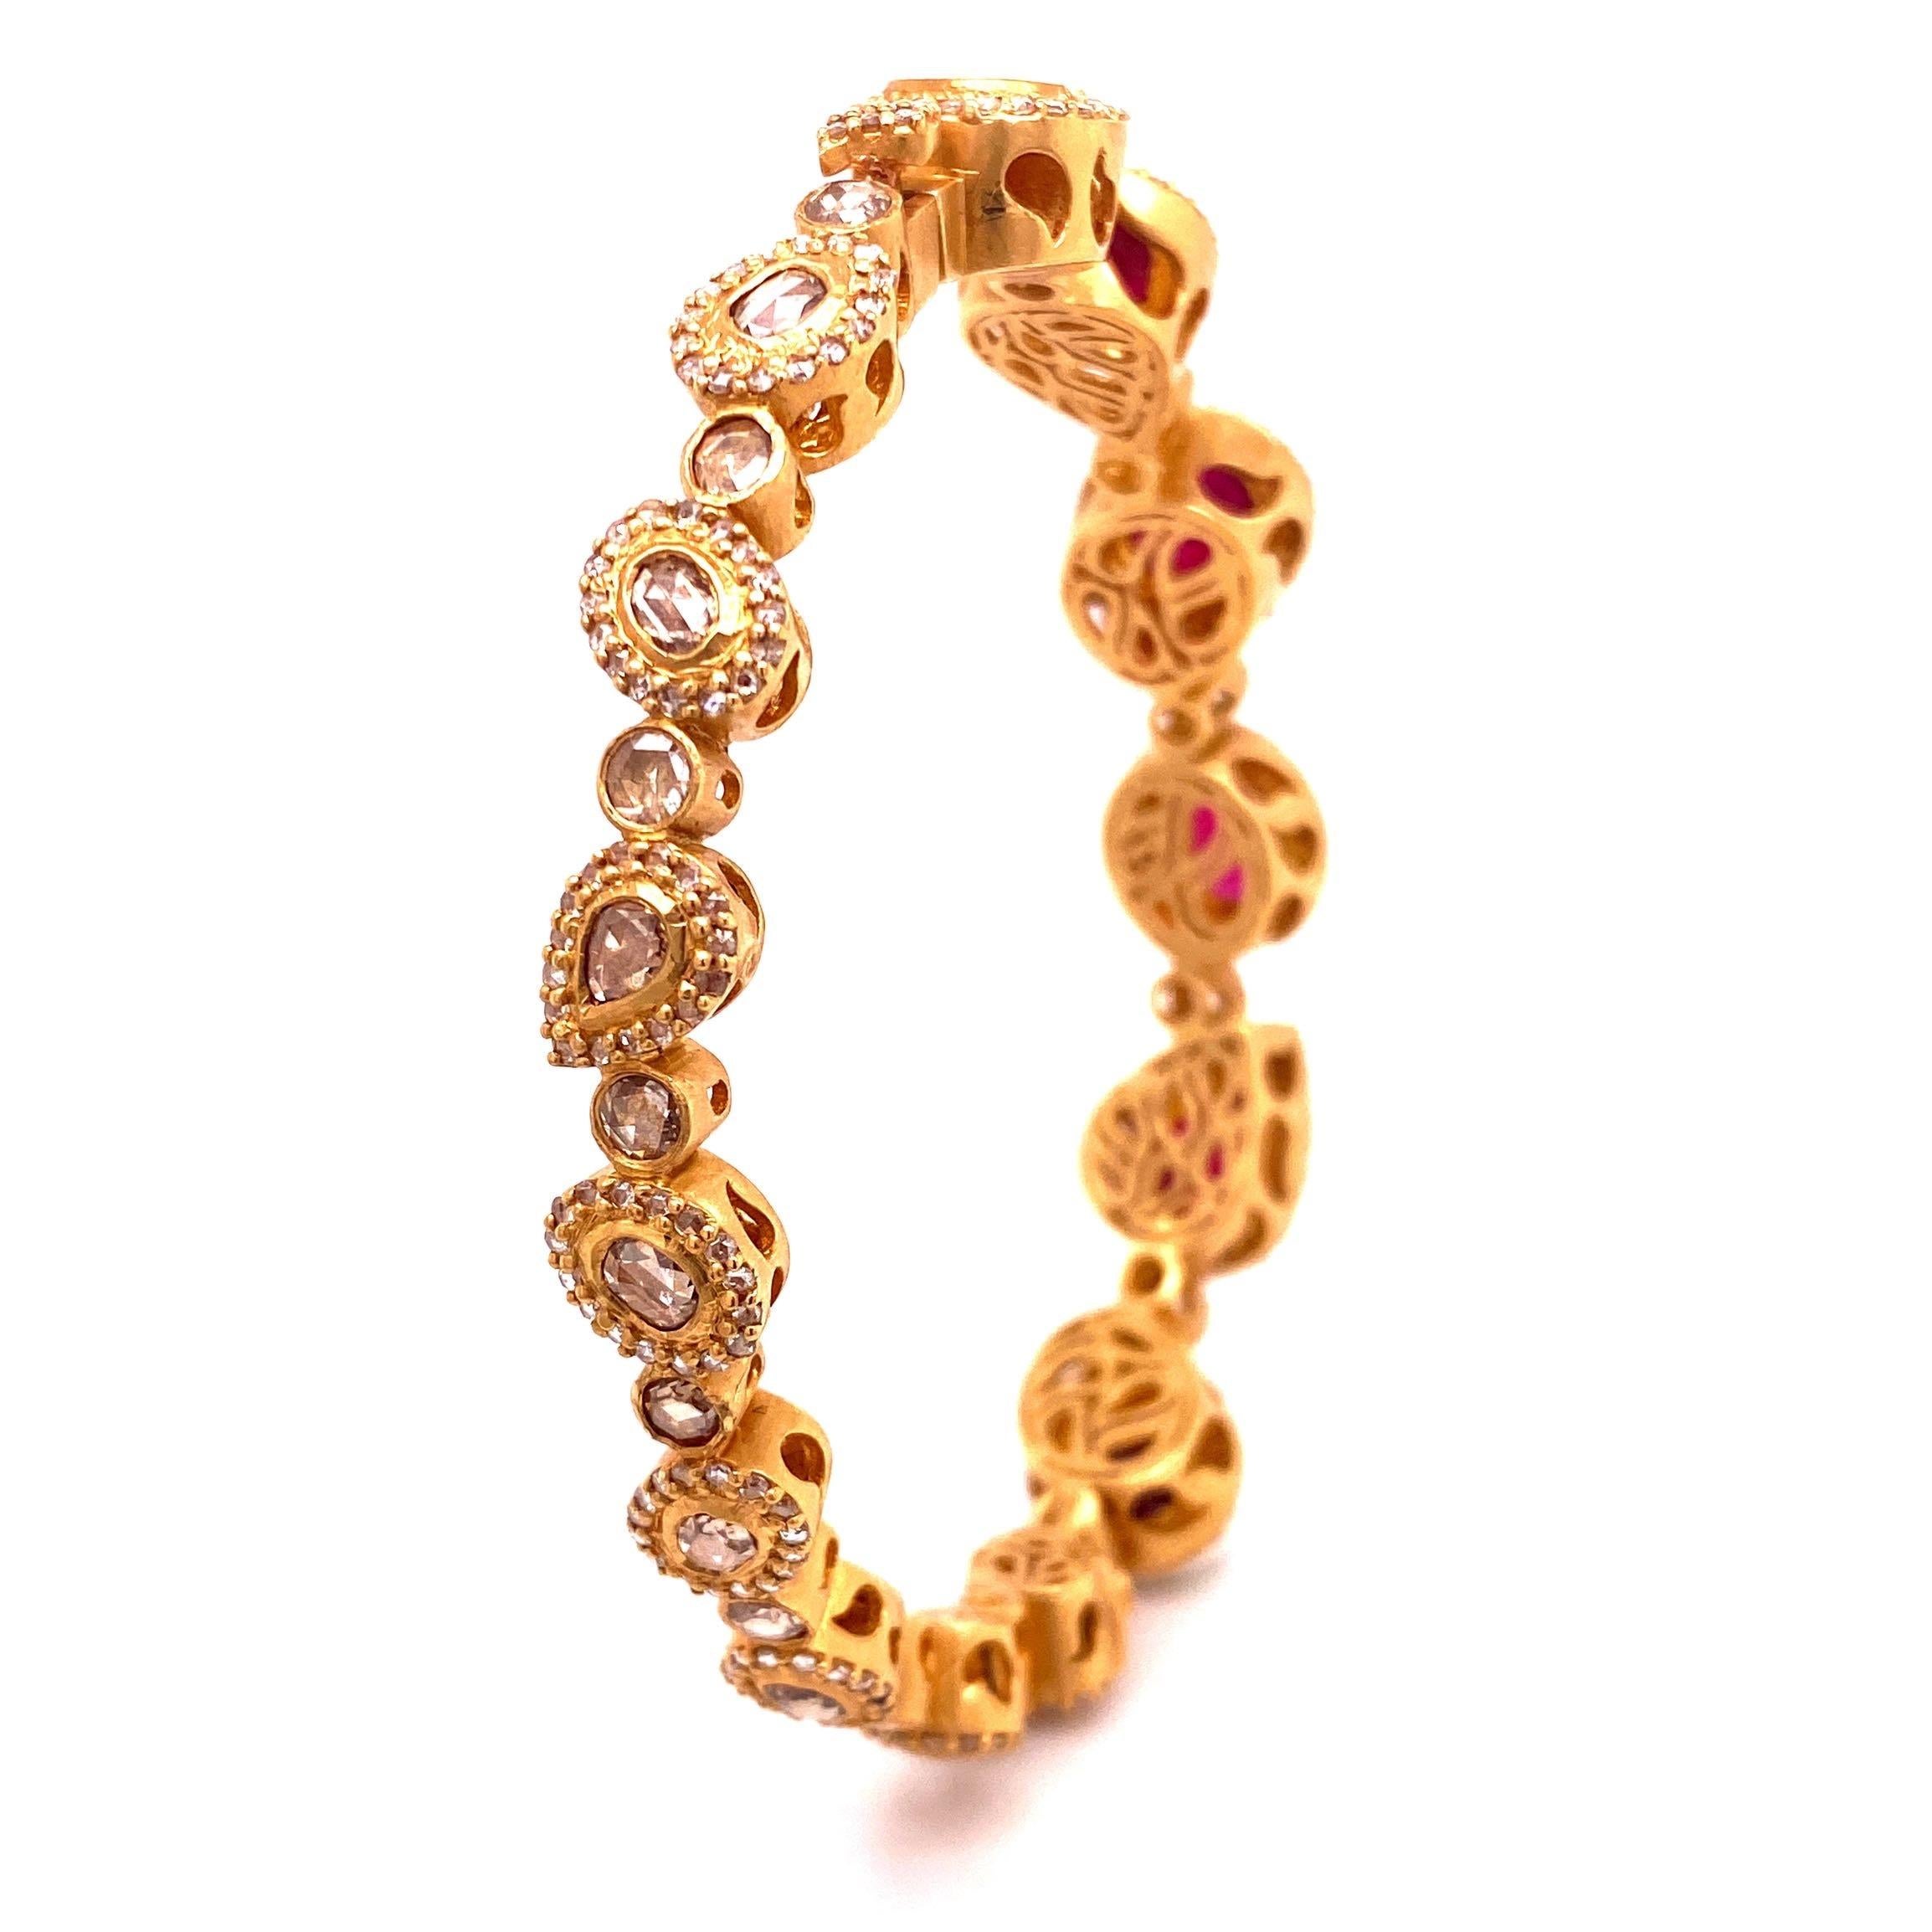 Affinity Bracelet set in 20K Yellow Gold. Ruby 9.77cts, and Rose-cut Diamond on the back of bracelet 3.39cts. 

20K Yellow Gold 
9.77cts Ruby 
3.39cts Diamonds 